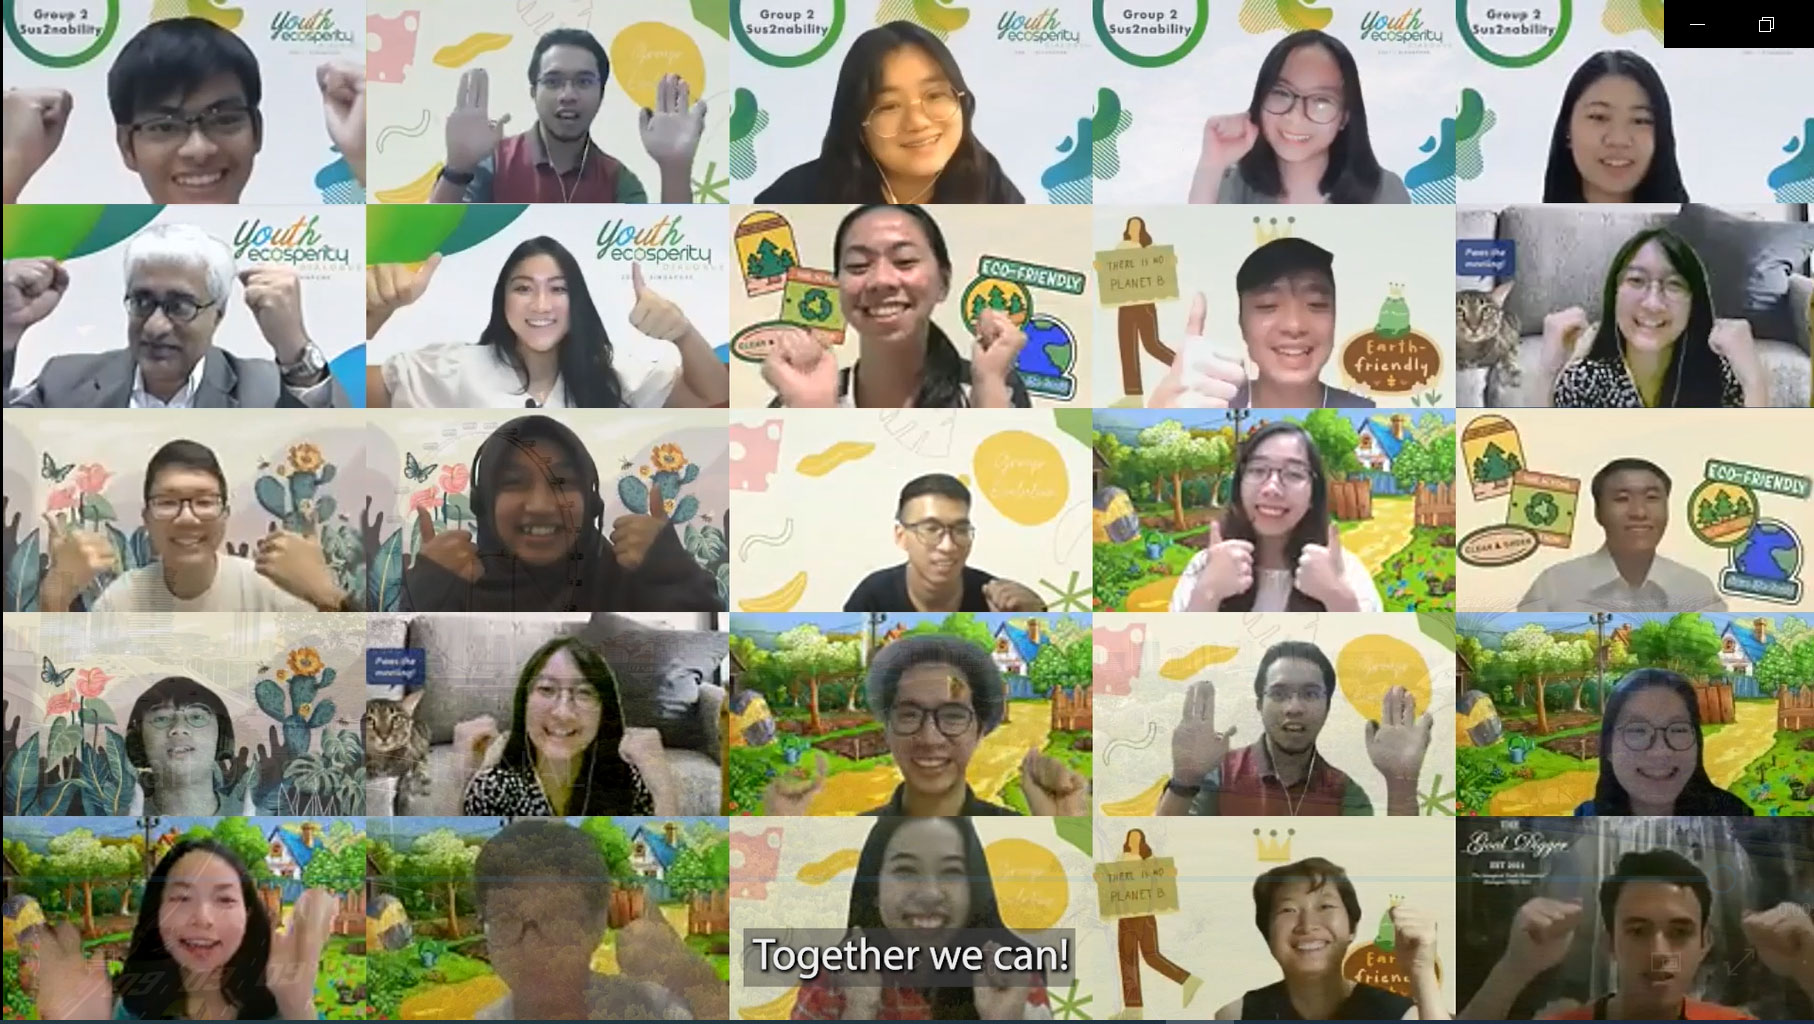 YOUTH ECOSPERITY DIALOGUE 2021 GOES VIRTUAL, SEES HEALTHY PARTICIPATION